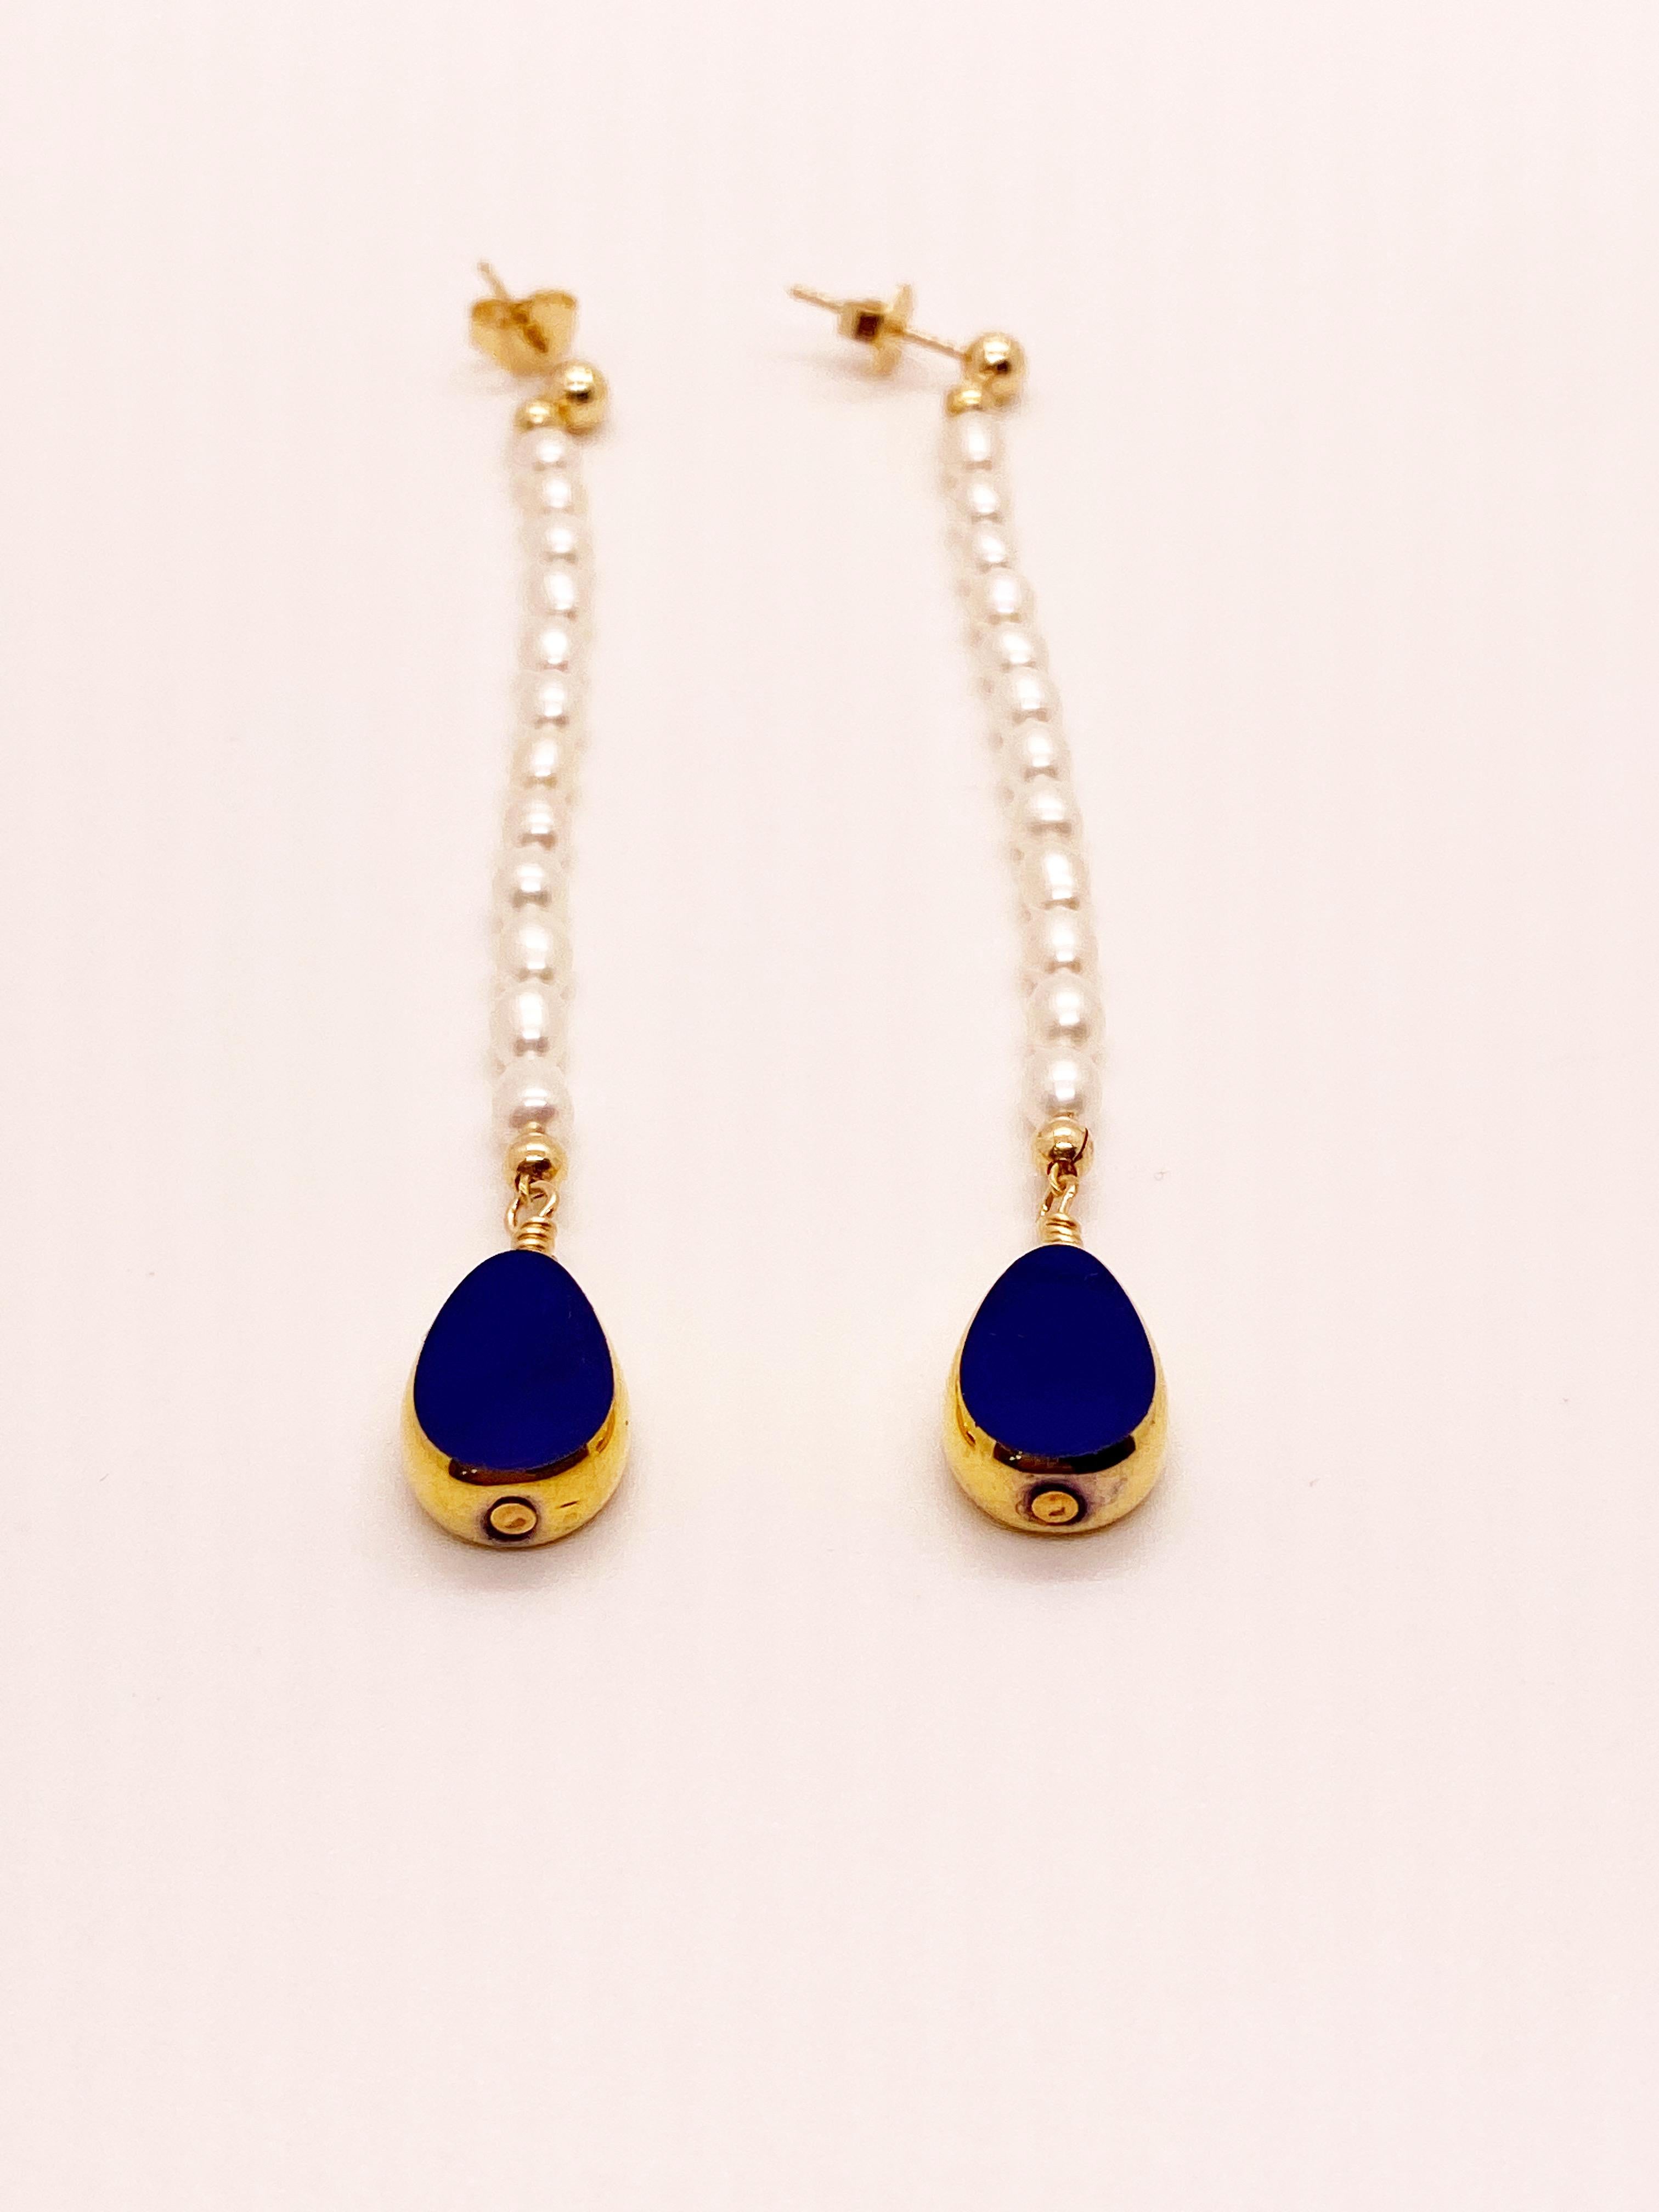 Blue opaque teardrop vintage German glass beads edged with 24K gold dangles on freshwater pearls on 14K gold filled earring stud. Entire earring is about 3.5 inches.

The vintage German glass beads are considered rare and collectible, circa